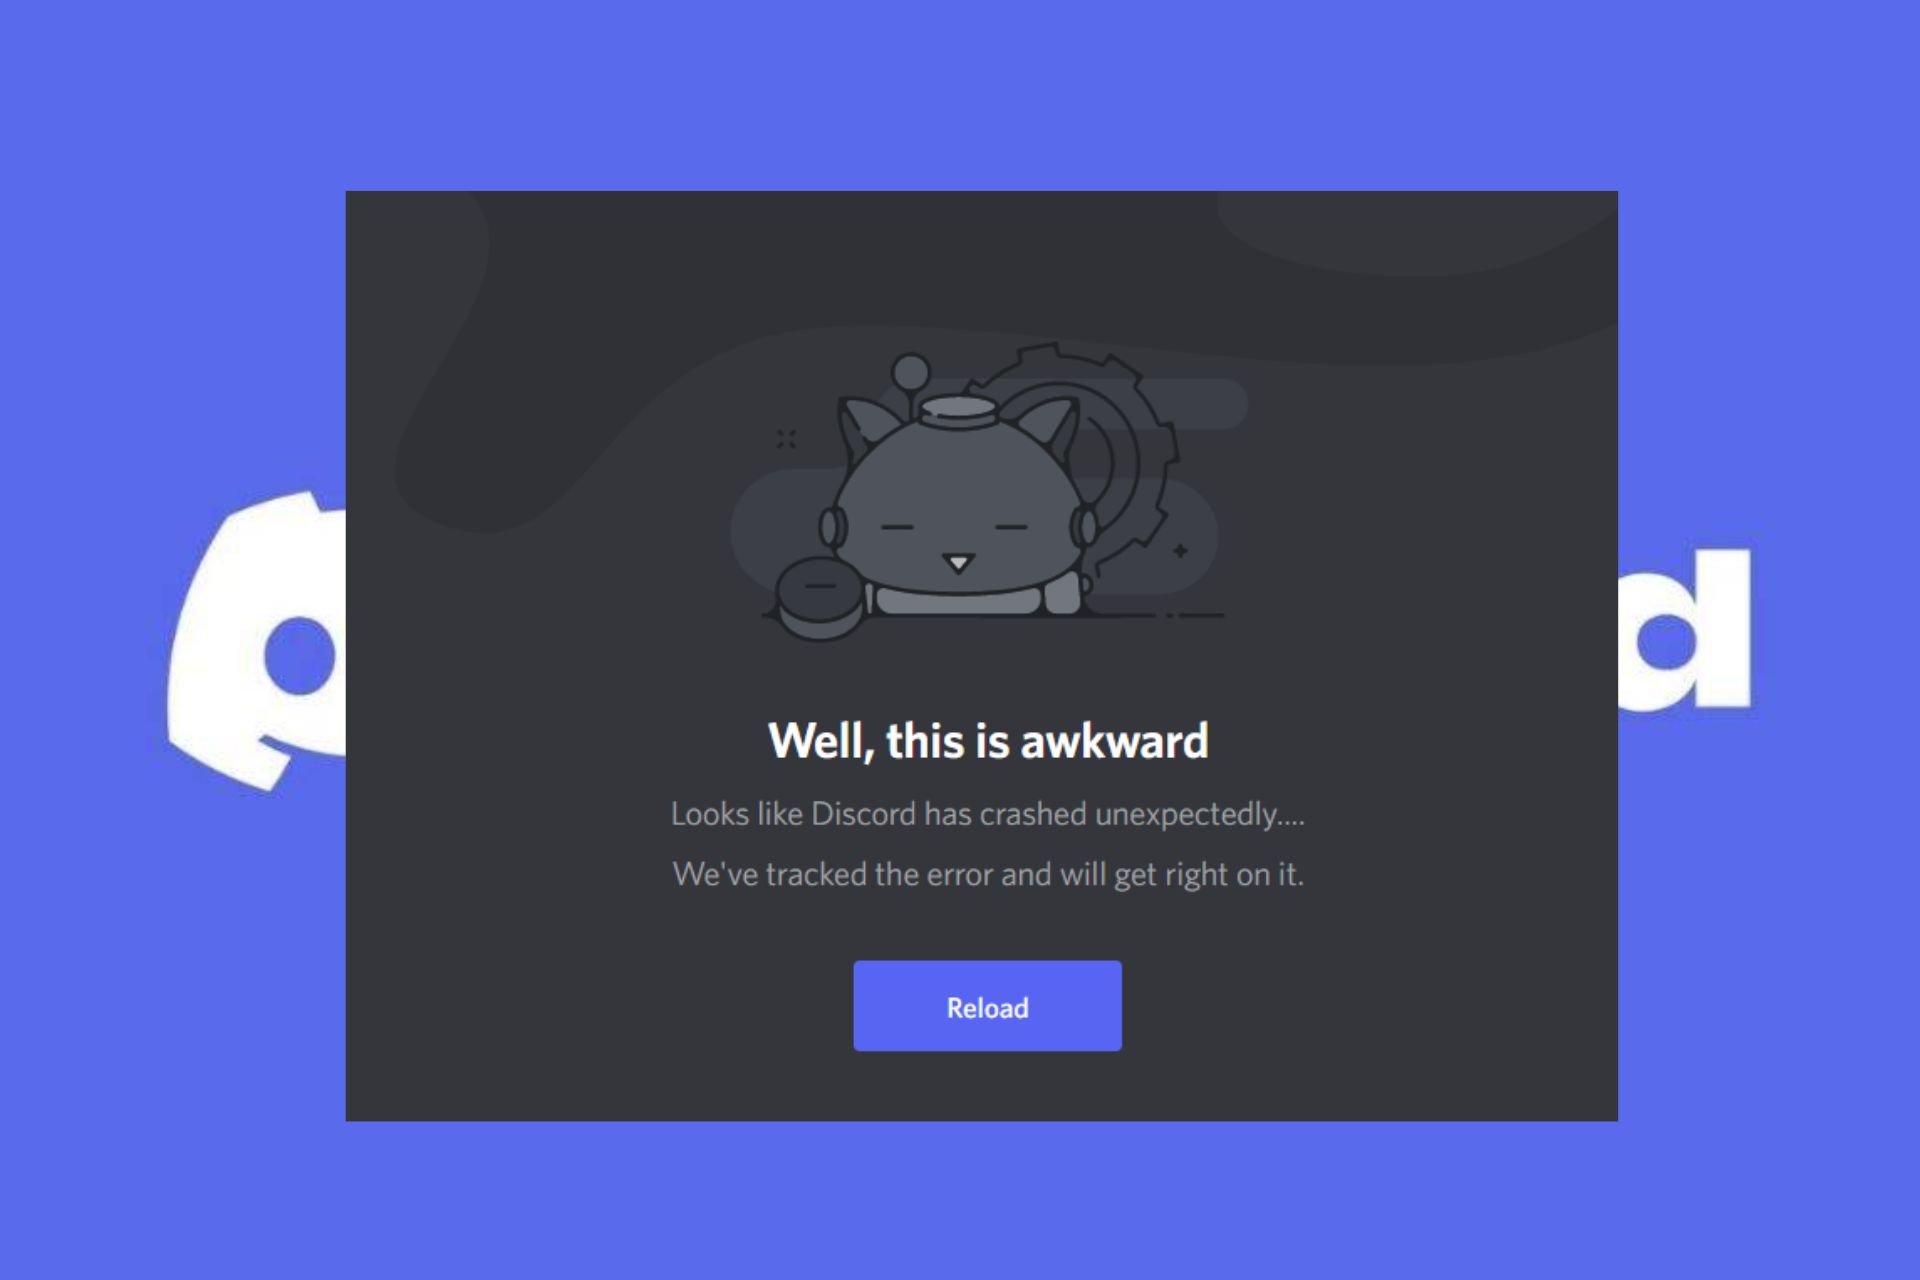 Looks like Discord has crashed unexpectedly